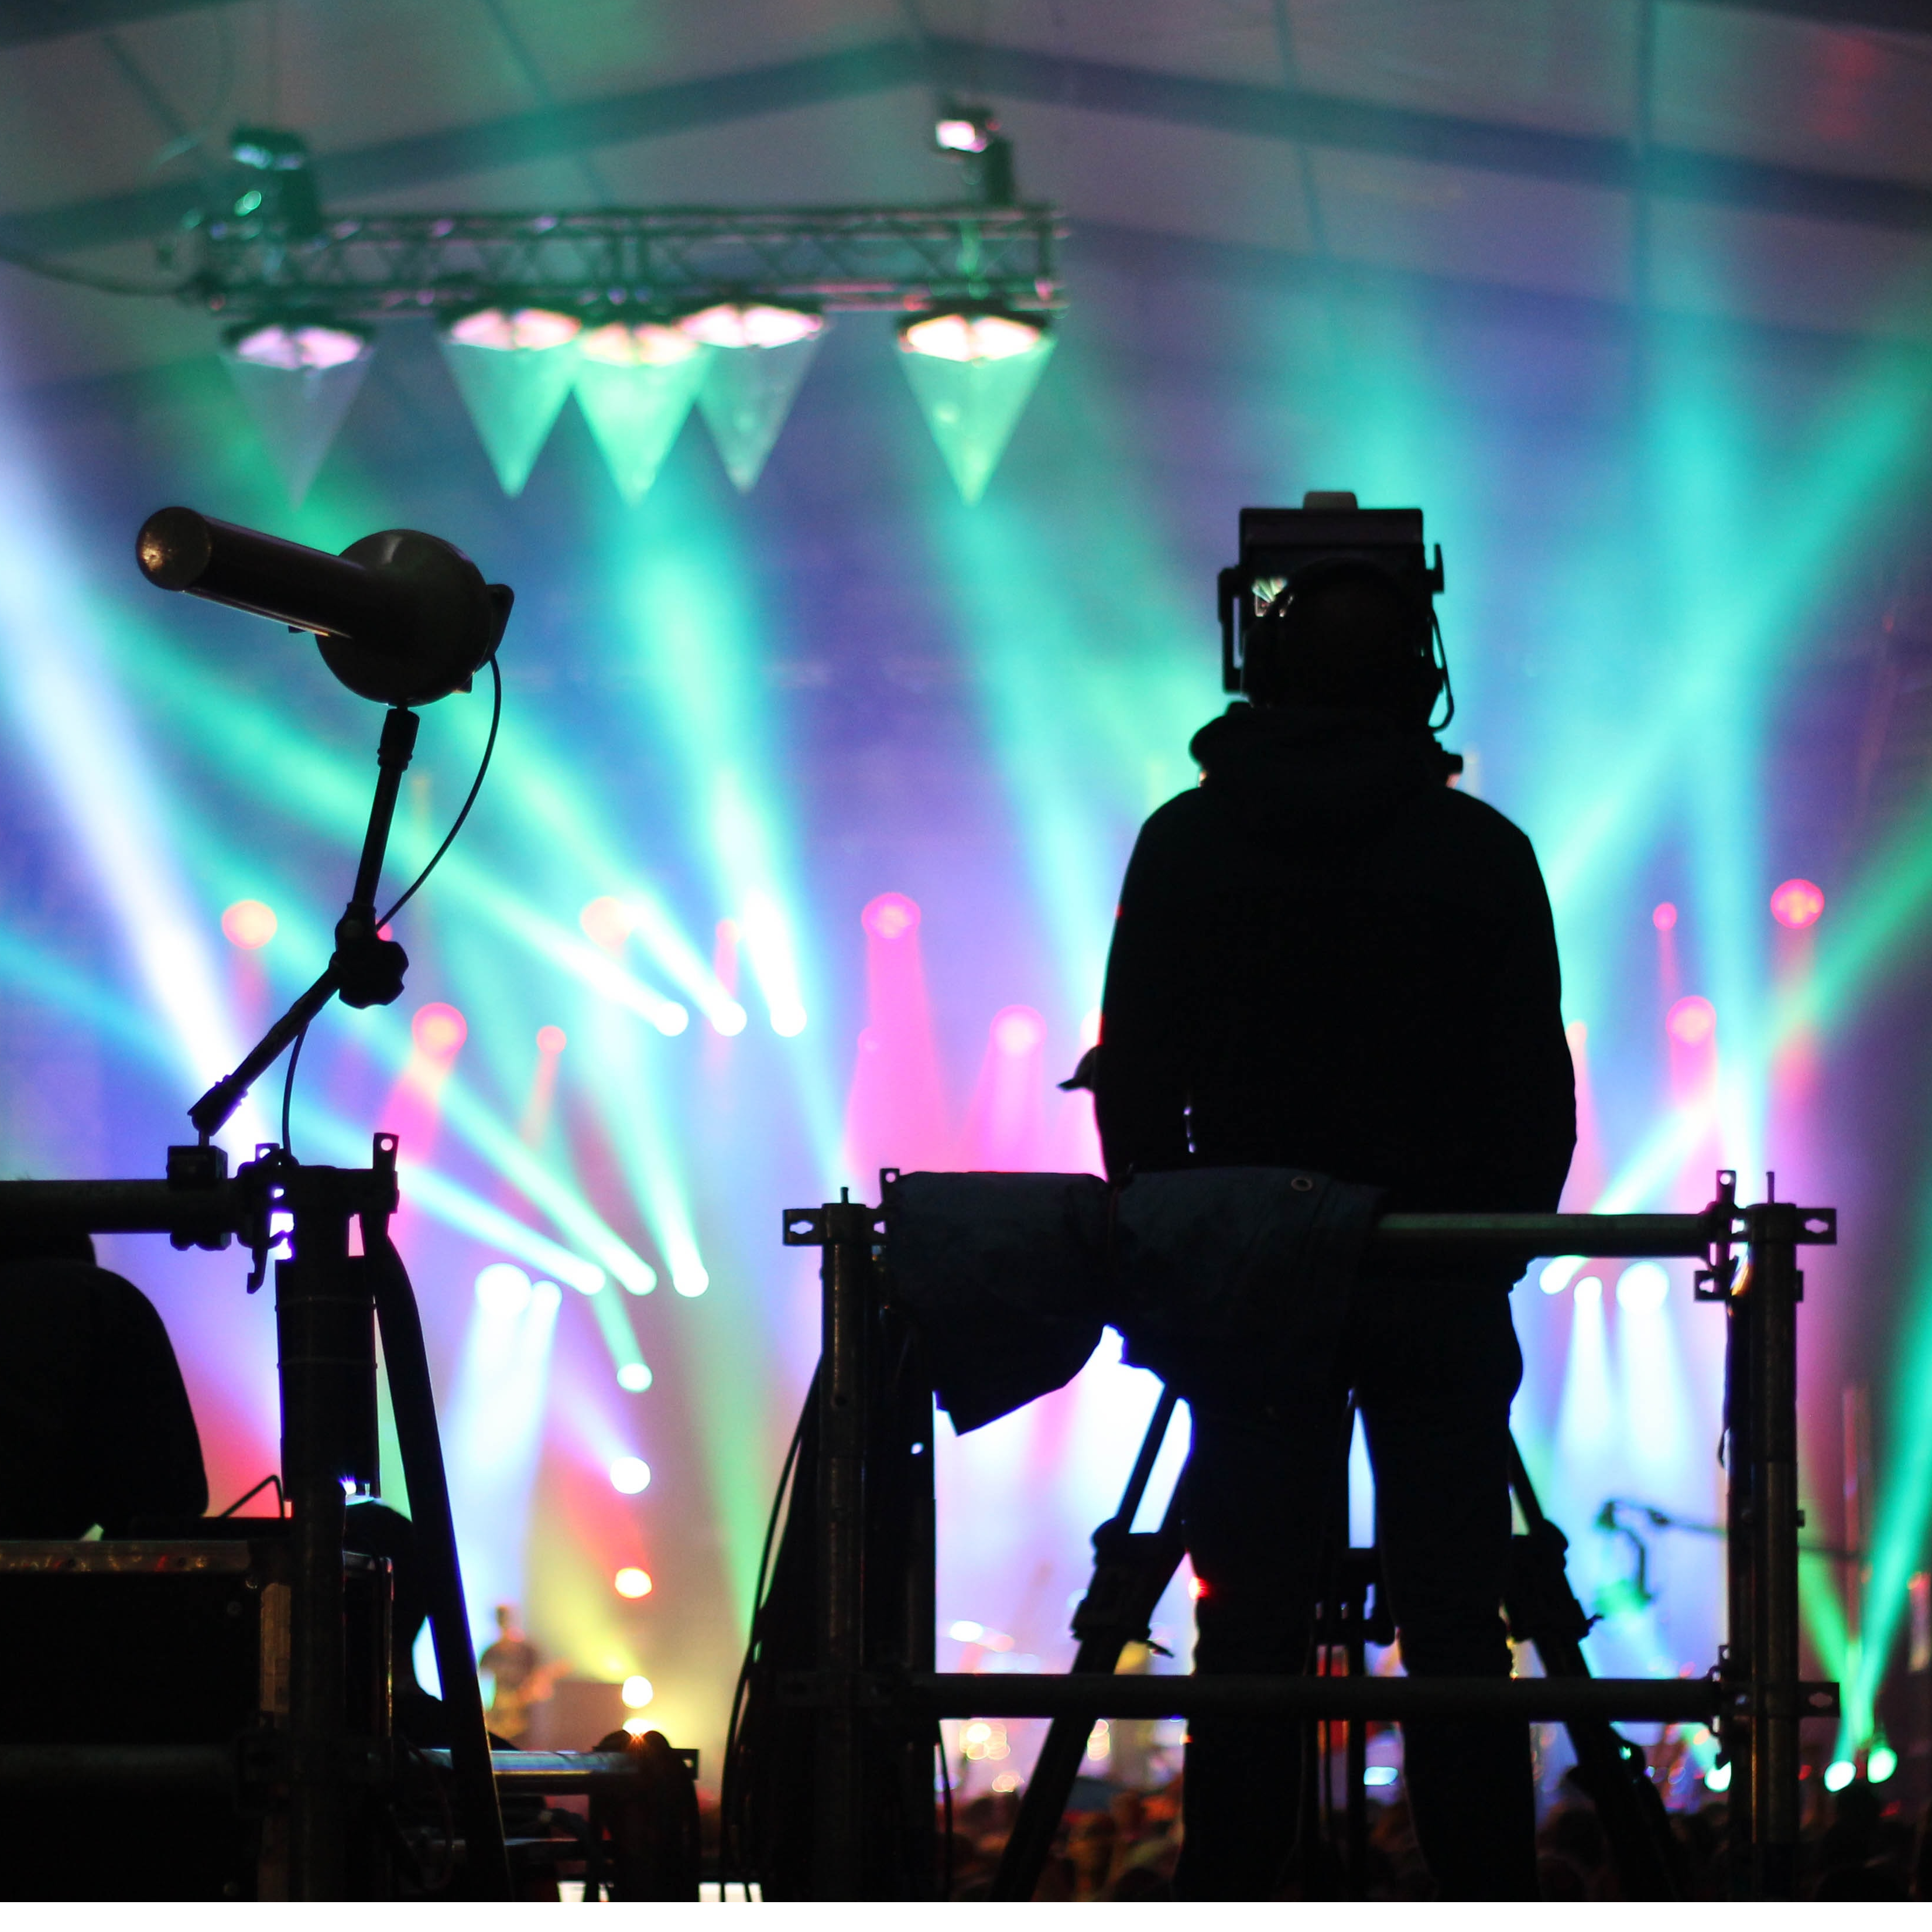 Silhouette of a man standing on a music venue with many stage lights